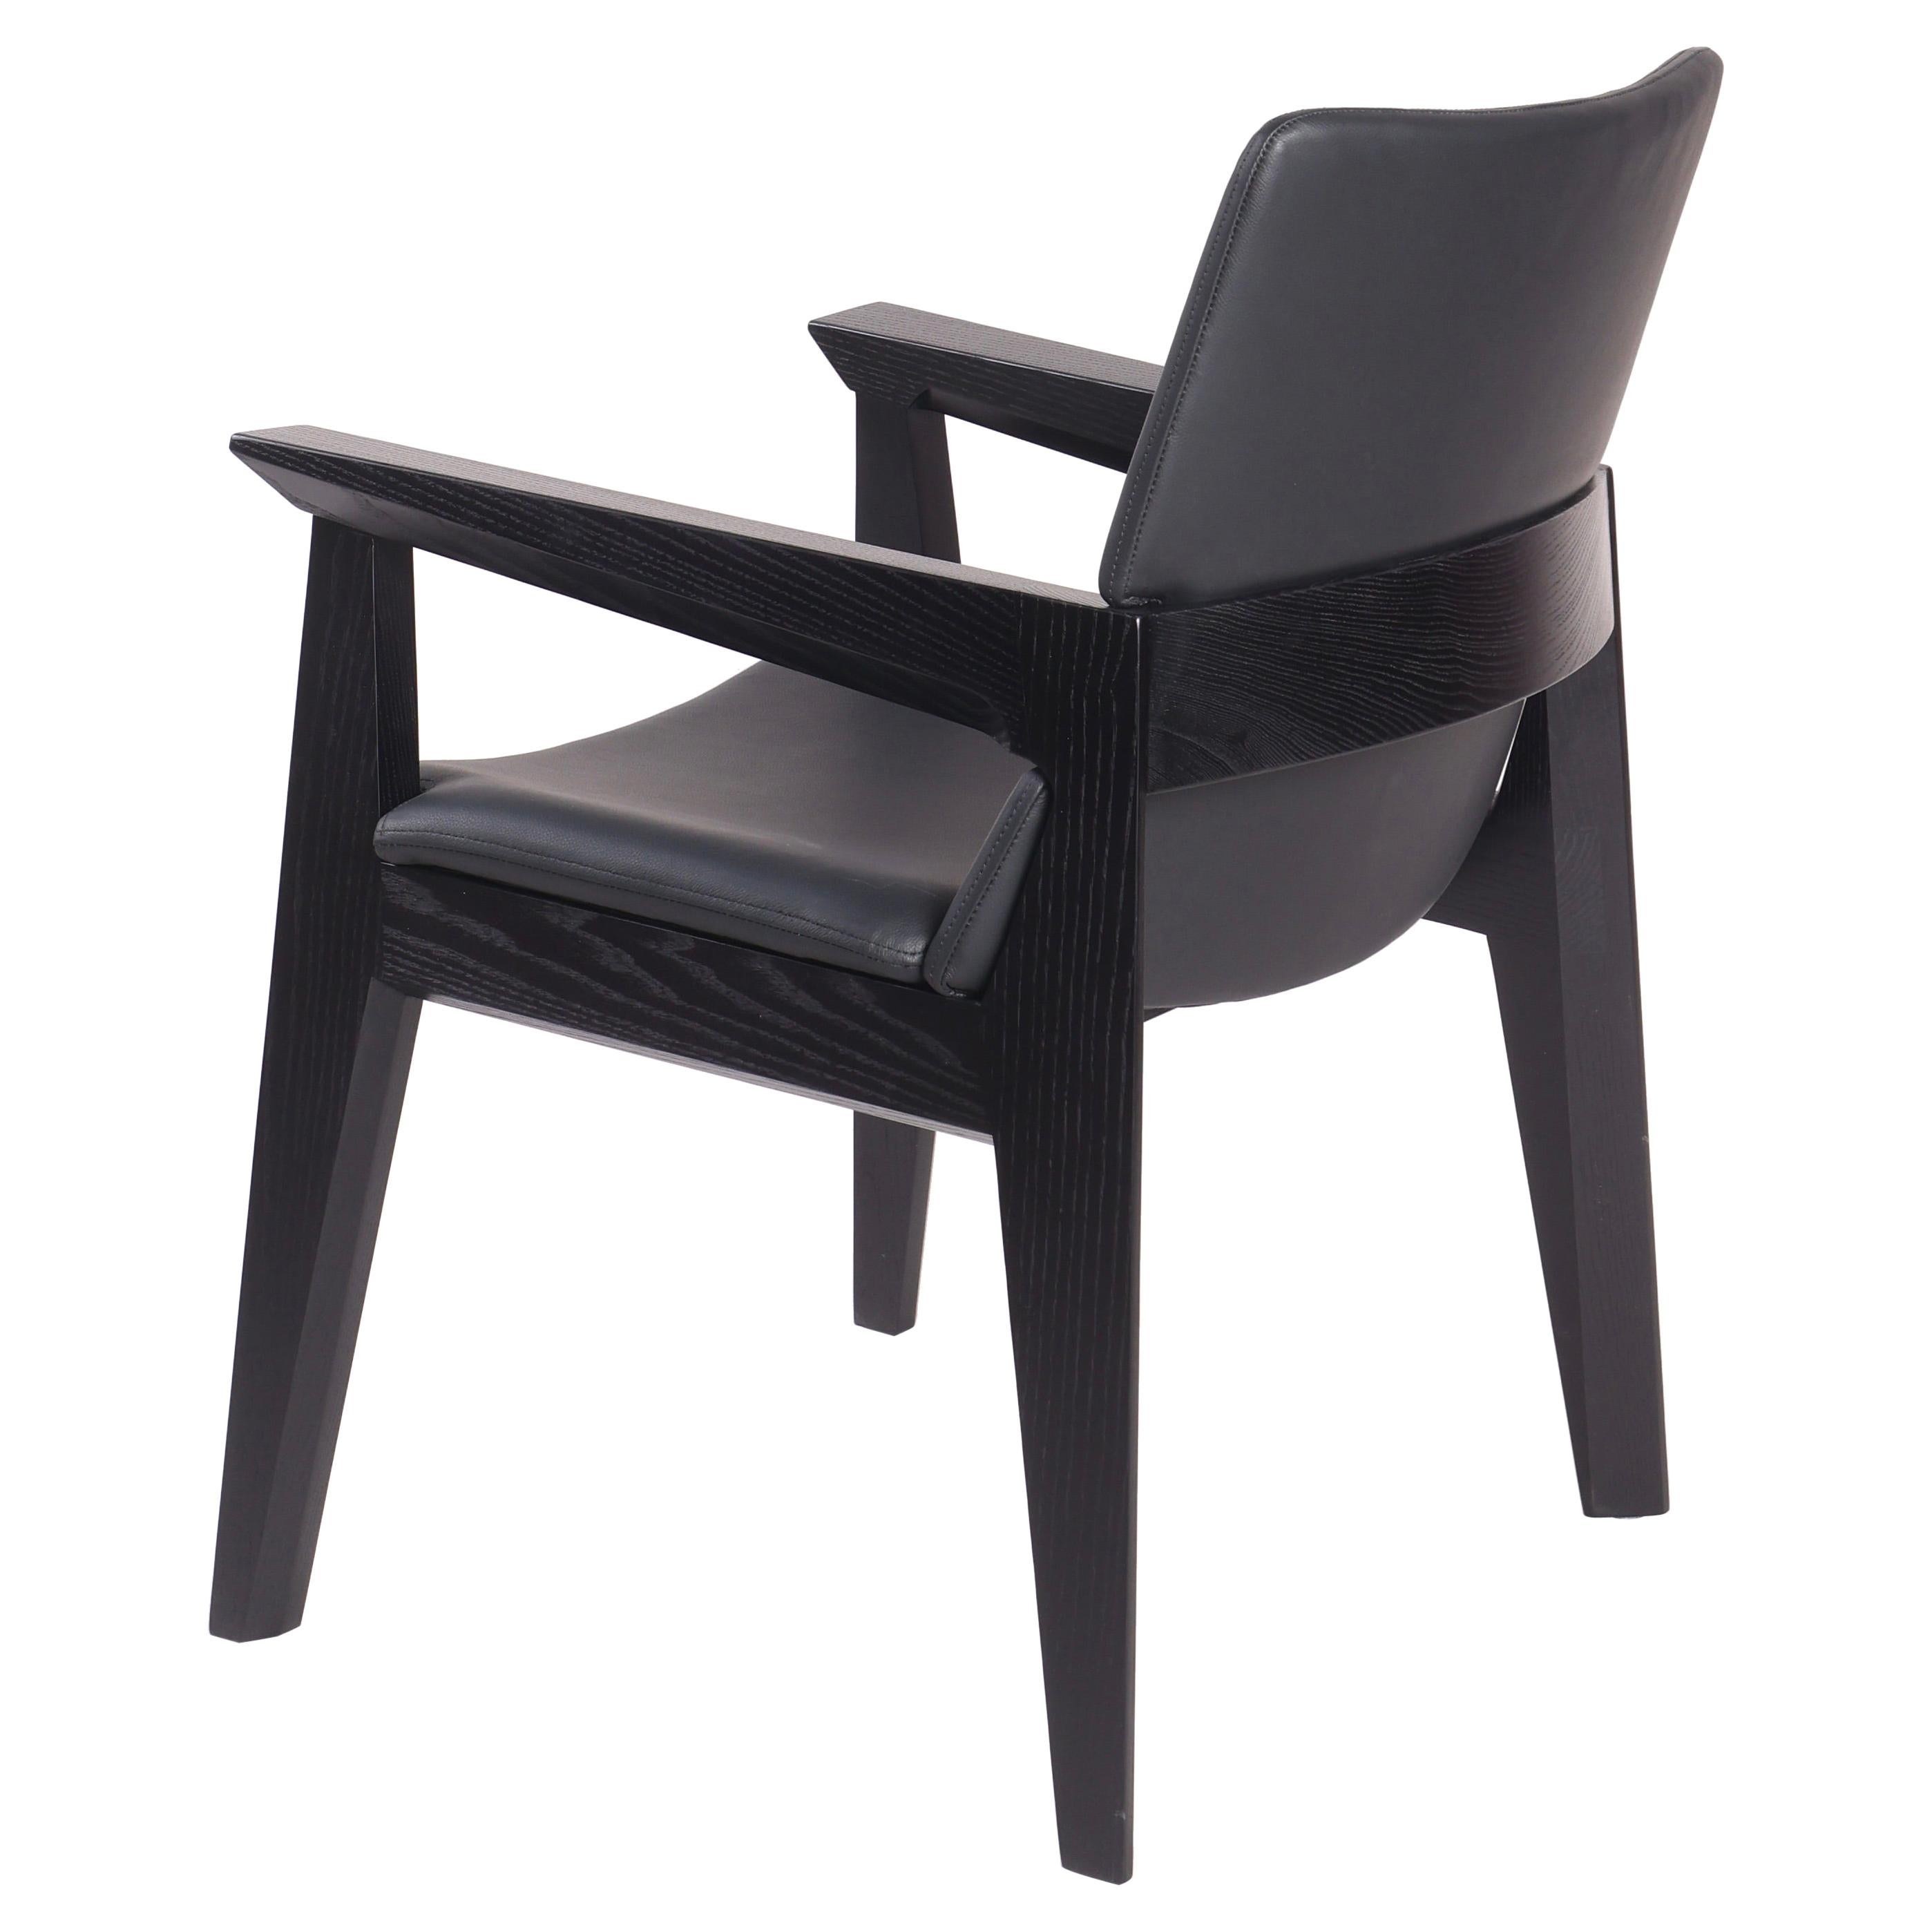 Solid Wood and Leather Arm Chair, Kroft Dining Chair